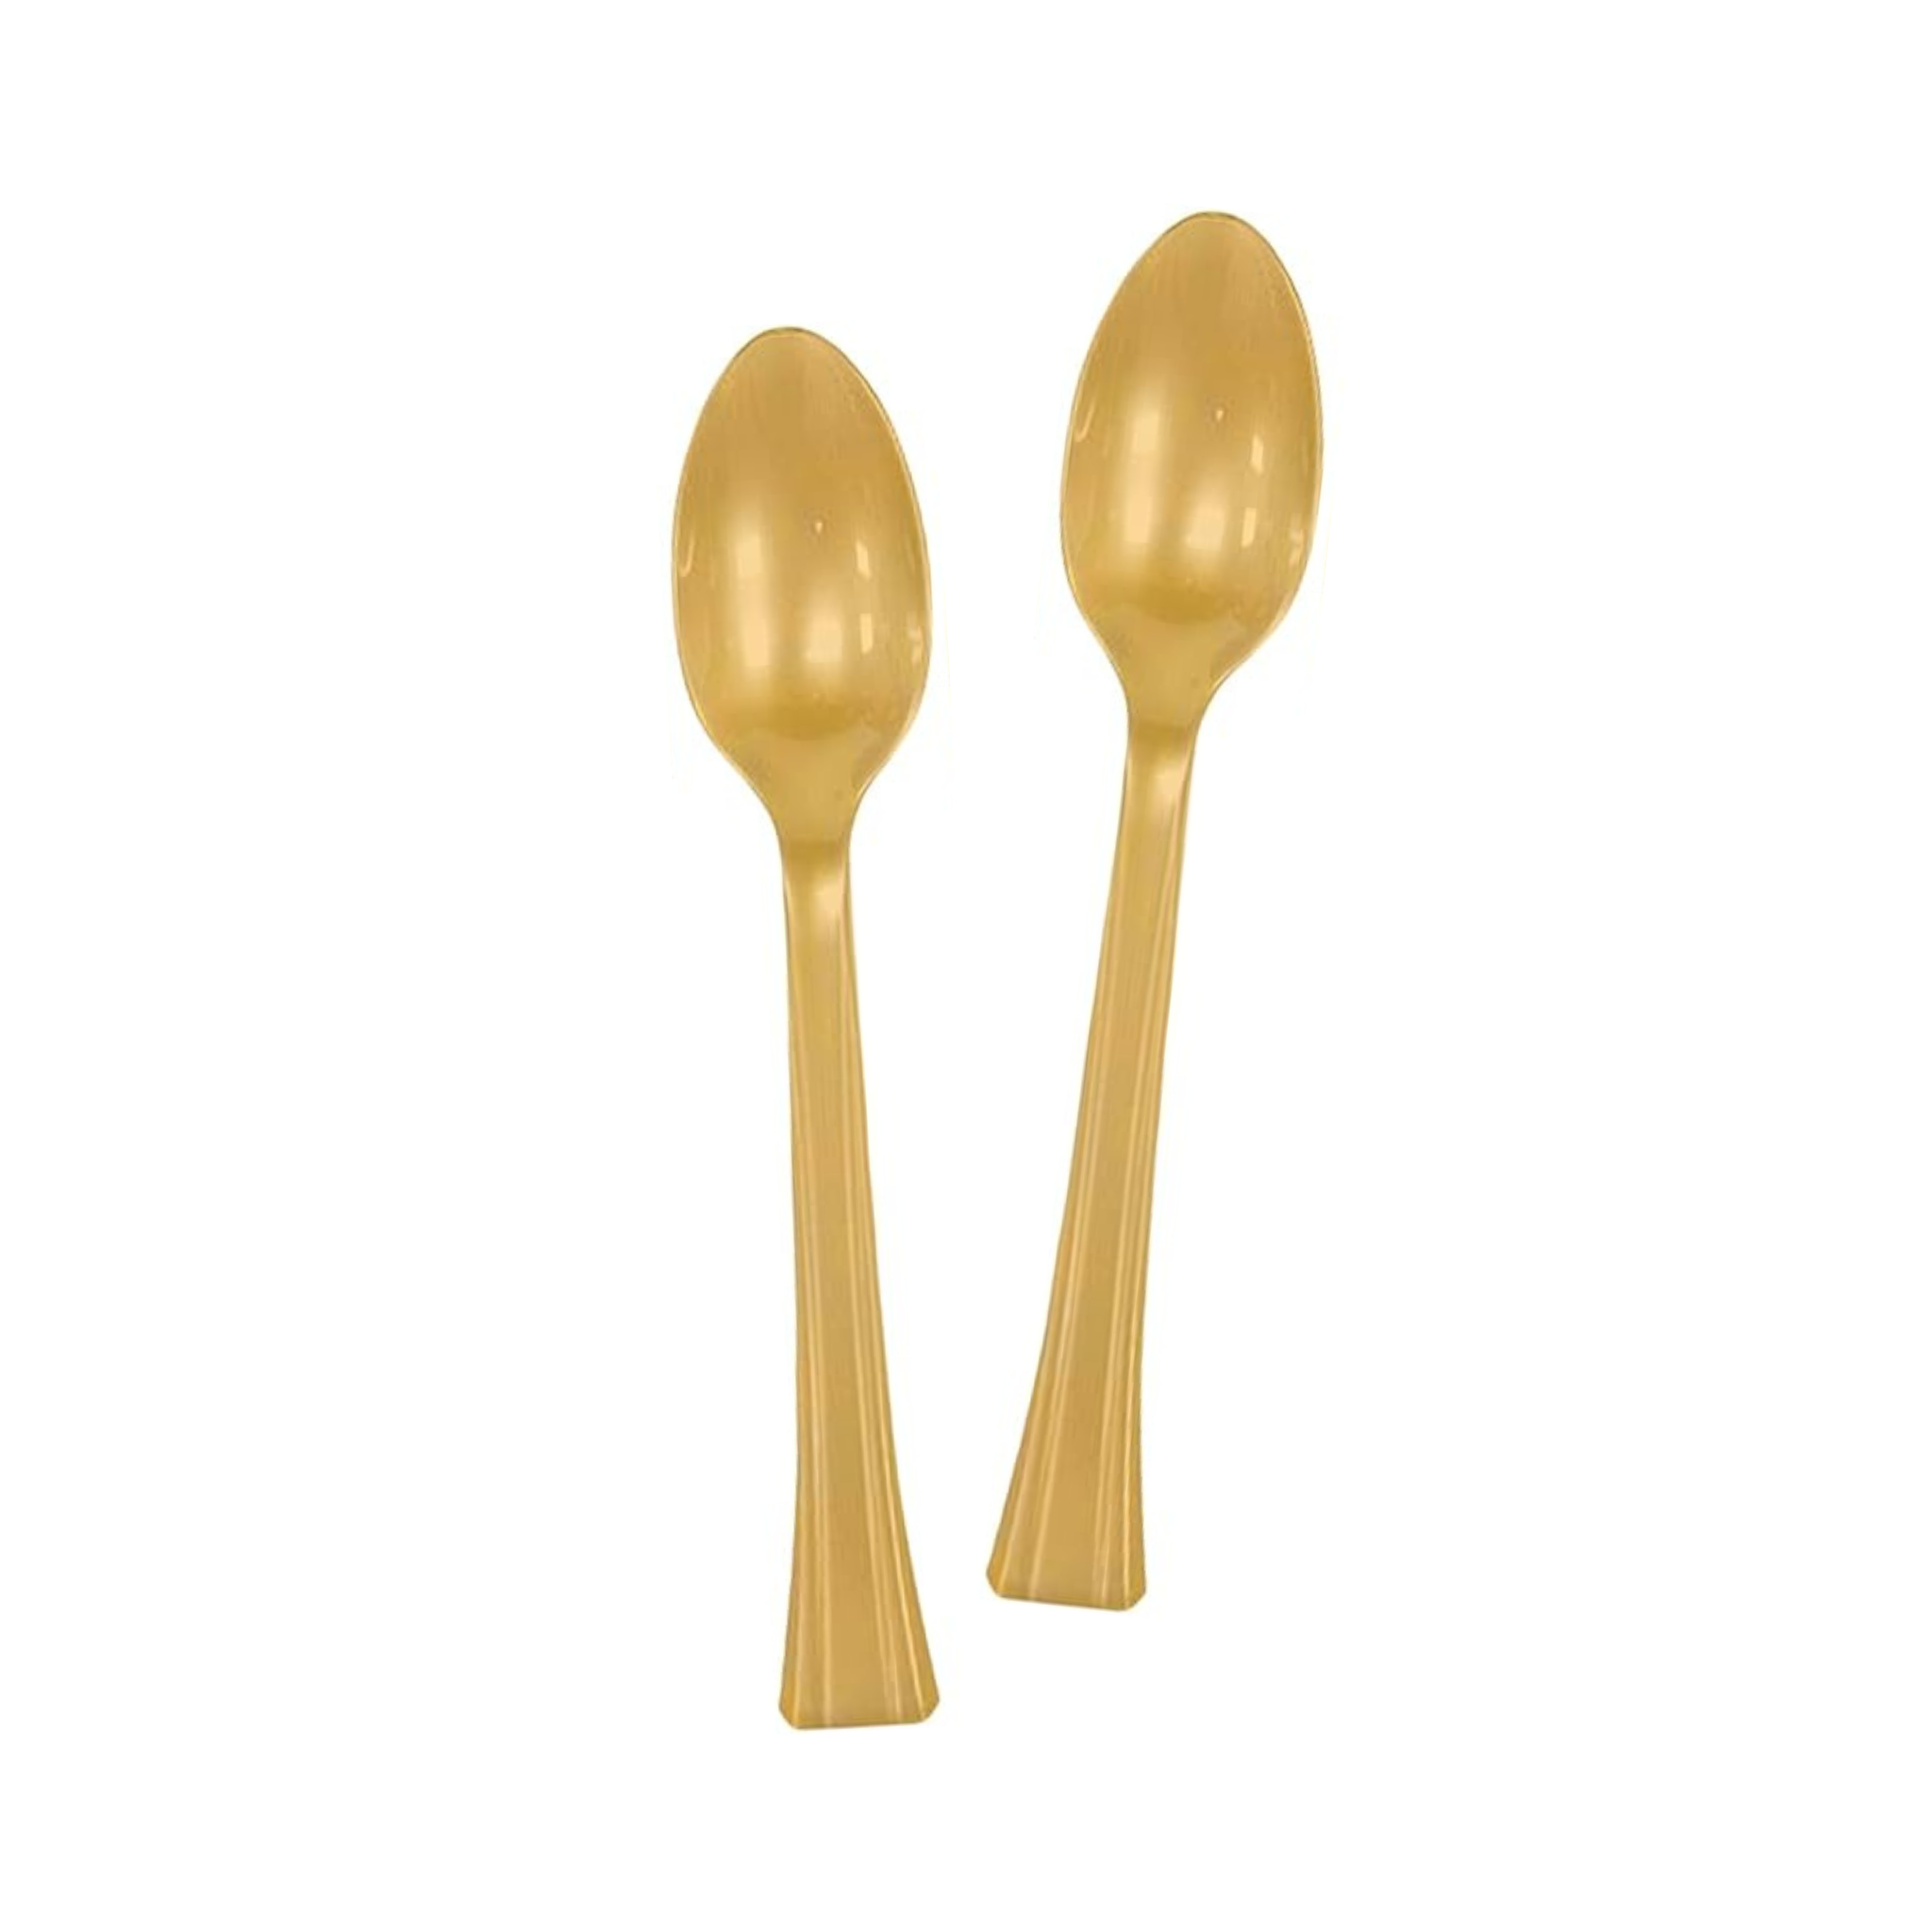 Gold Dino Birthday Party Cutlery Set (Spoons)